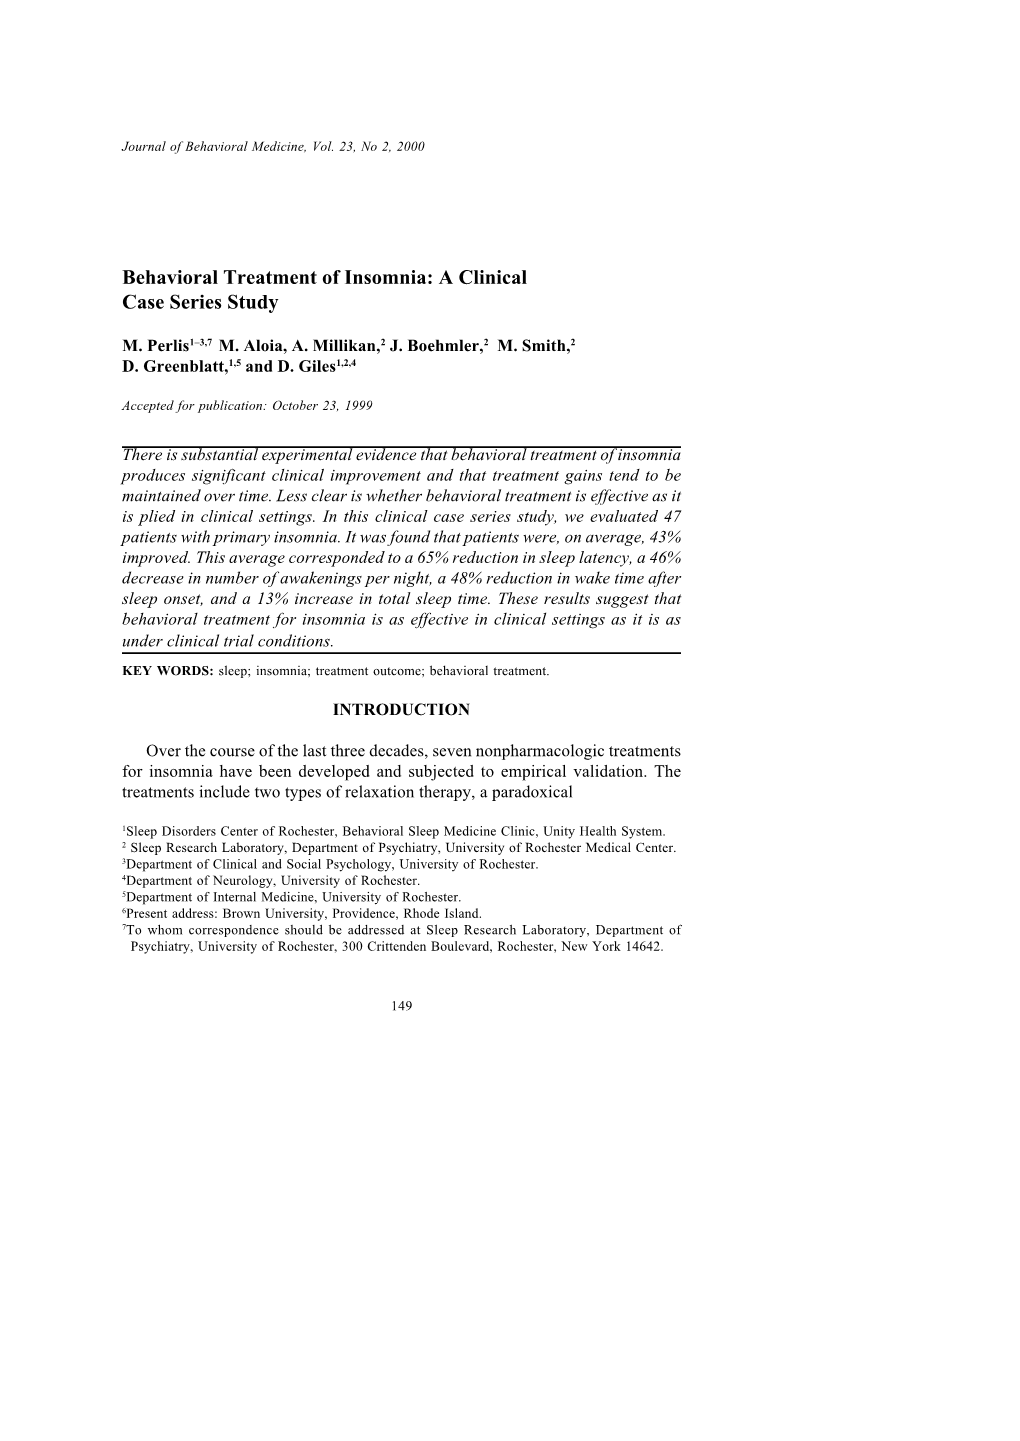 Behavioral Treatment of Insomnia: a Clinical Case Series Study, 1999